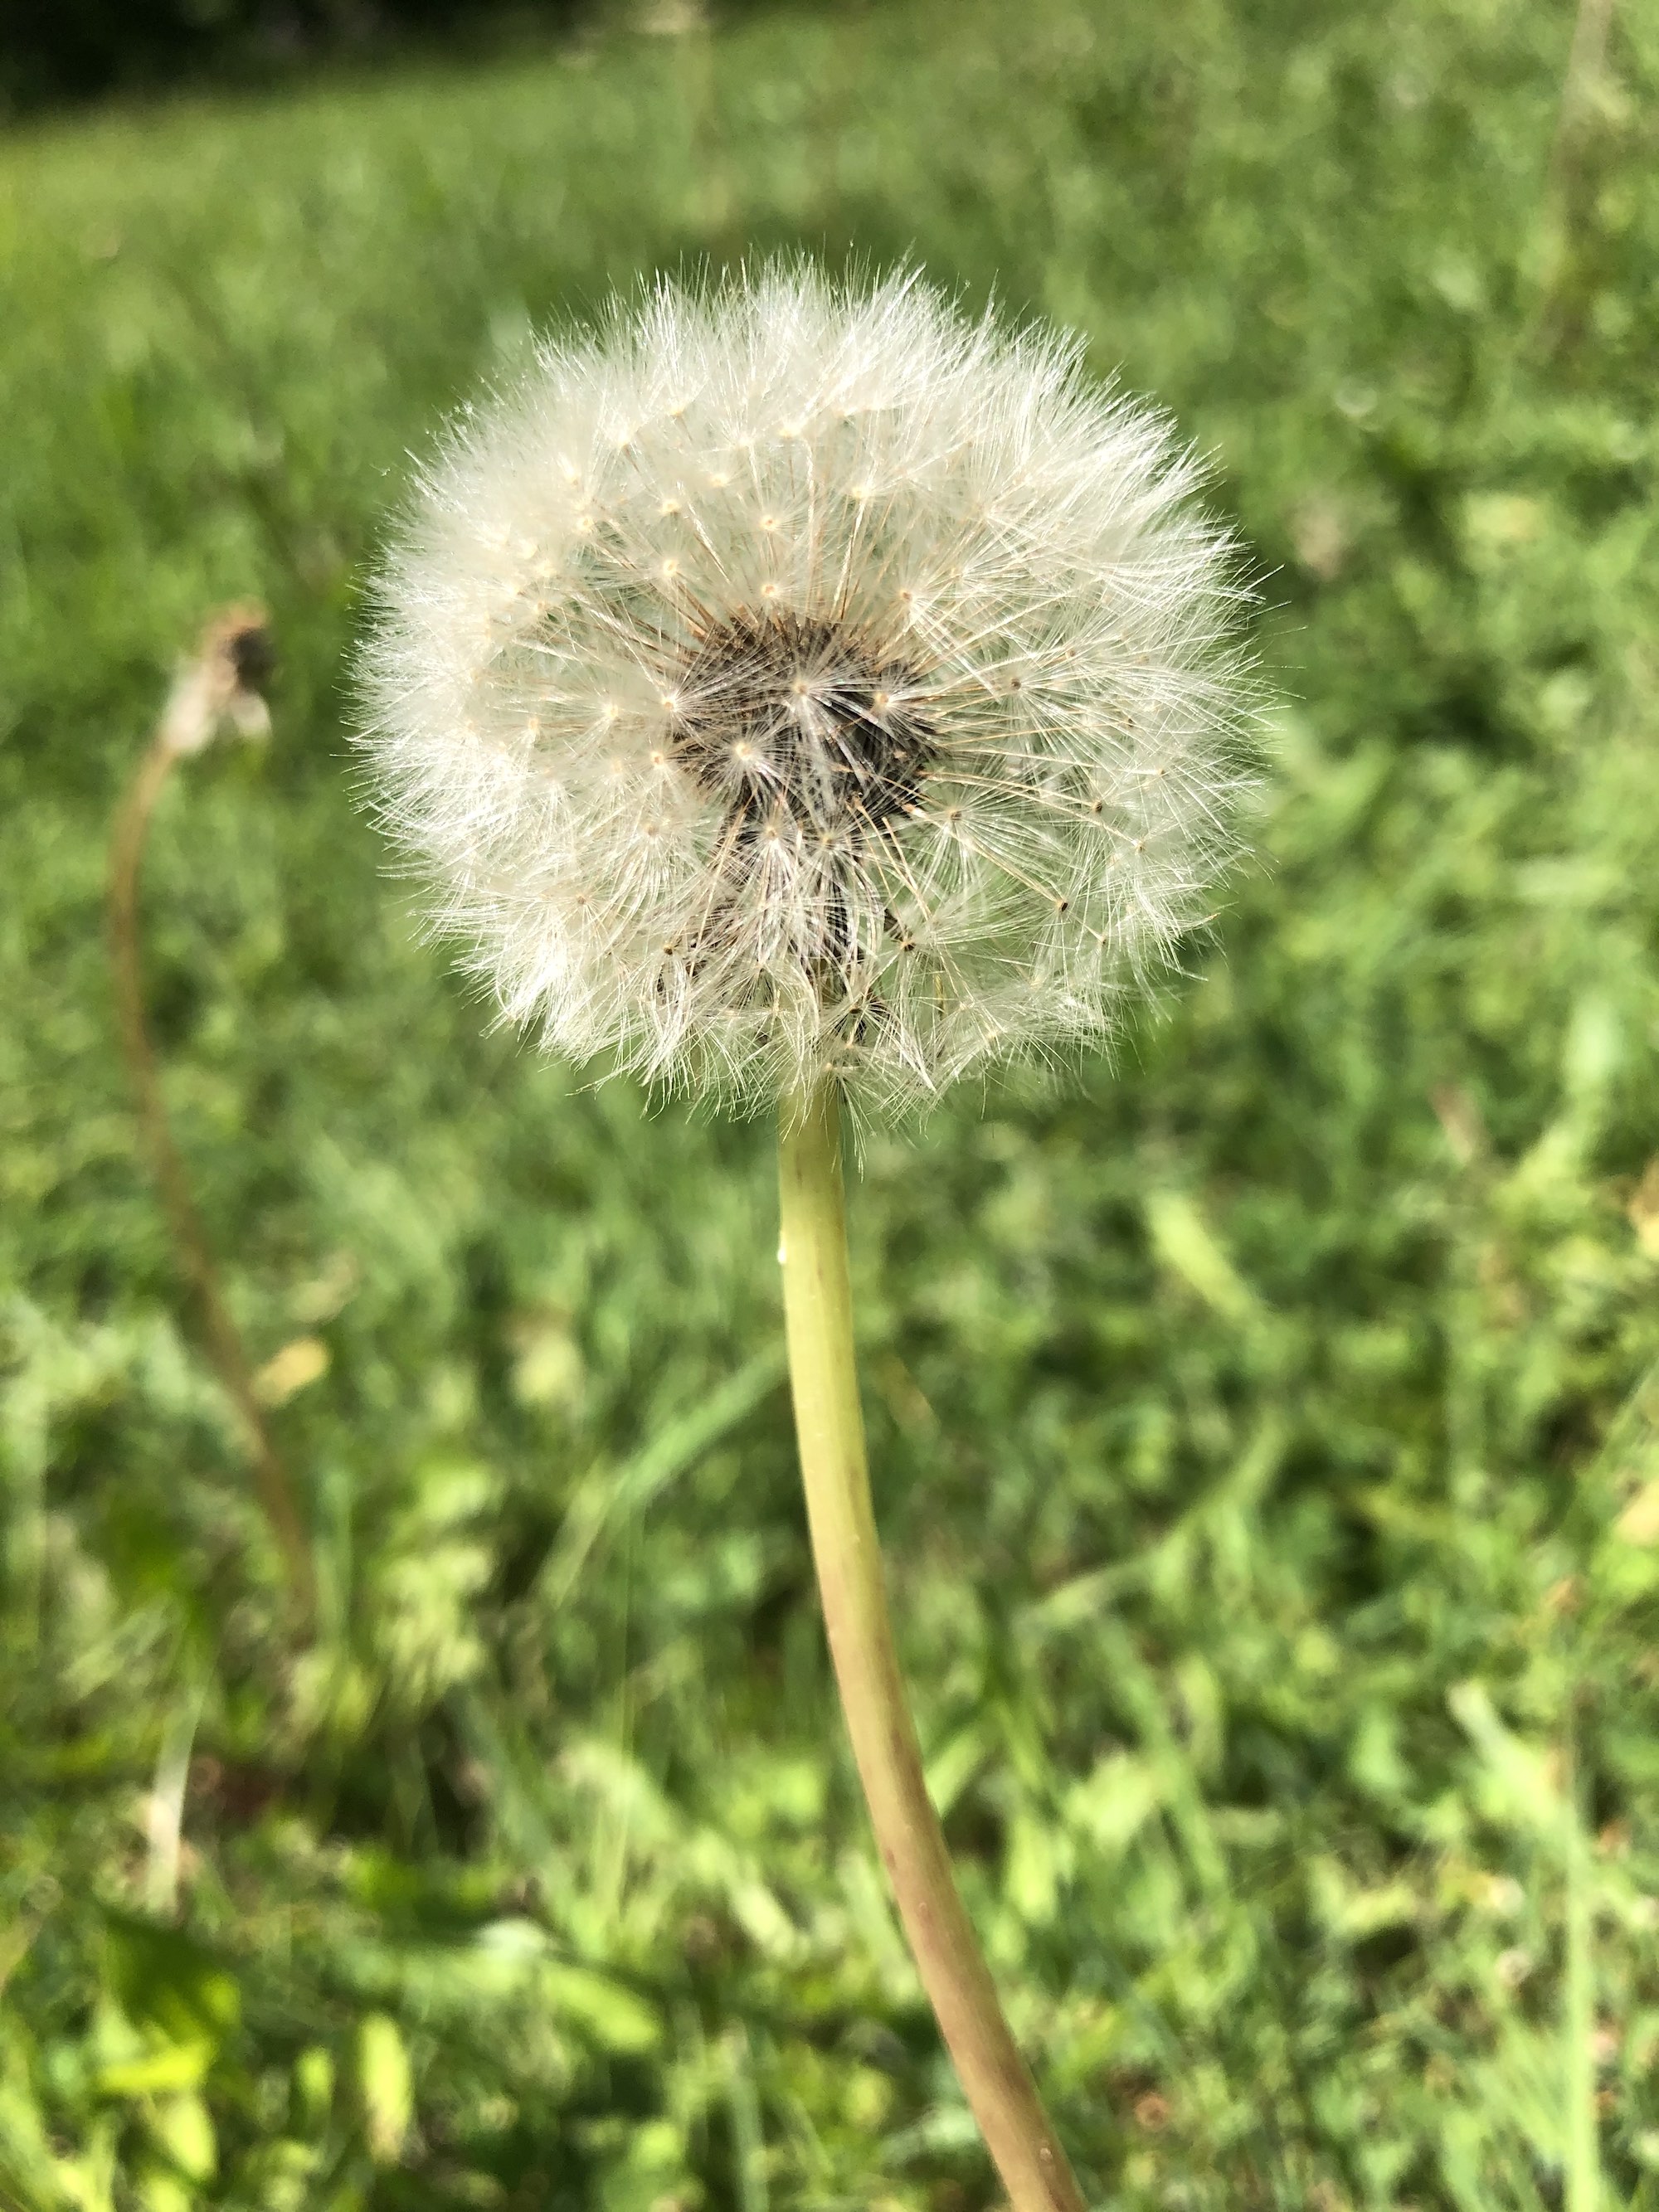 Dandelion puffball in Nakoma Park in Madison Wisconsin on May 31, 2020.